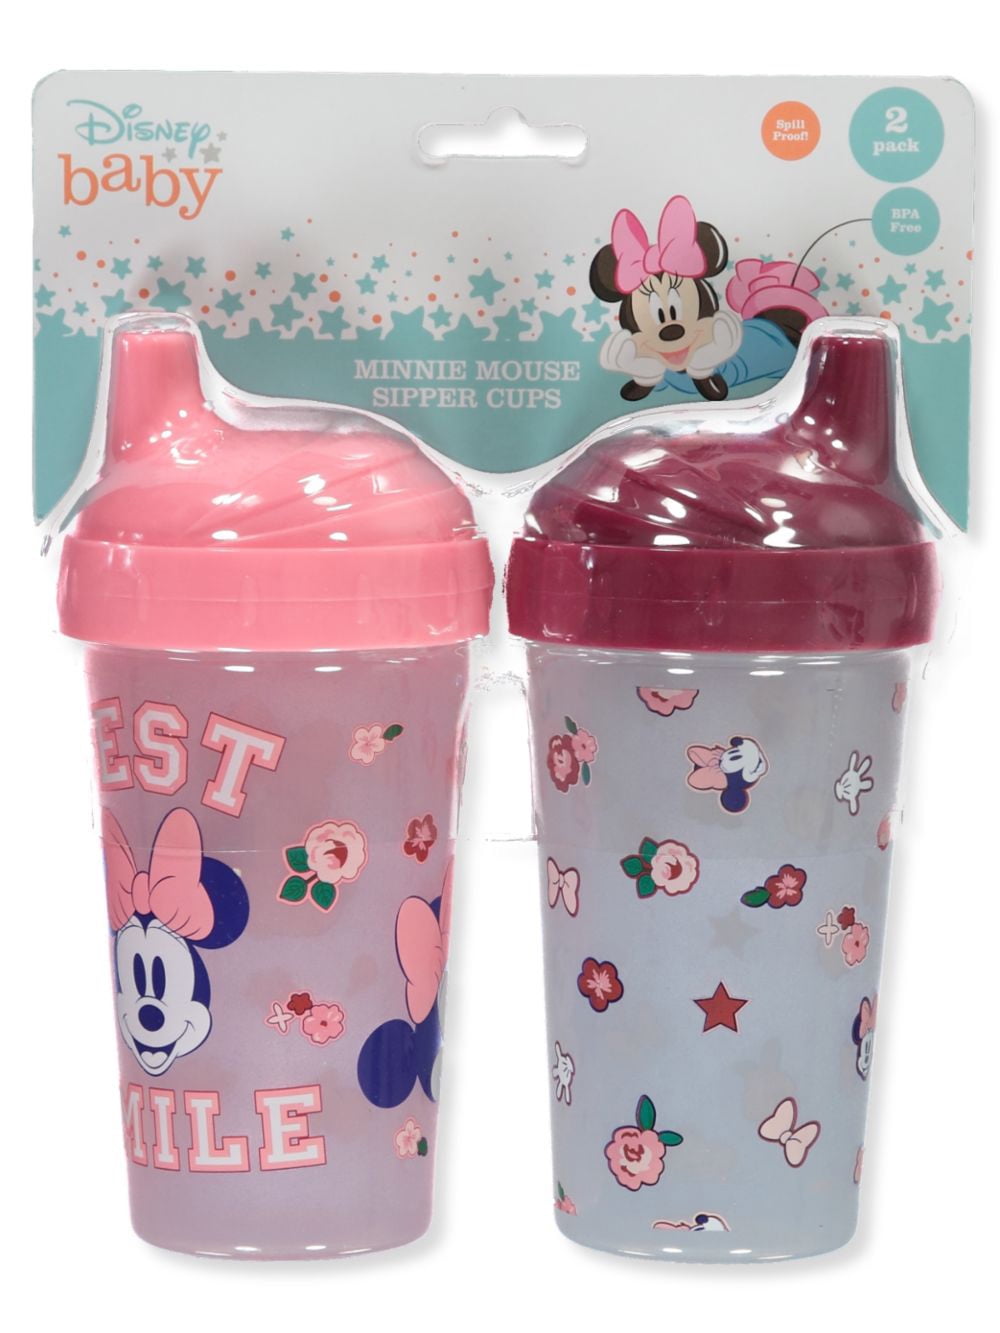 Disney Minnie Mouse Leak-Proof Sipper Cup Set for Kids - Bundle with 2  Disney Spill-Proof Sippy Cups Plus Minnie Stickers and More (Disney Sipper  Cups)